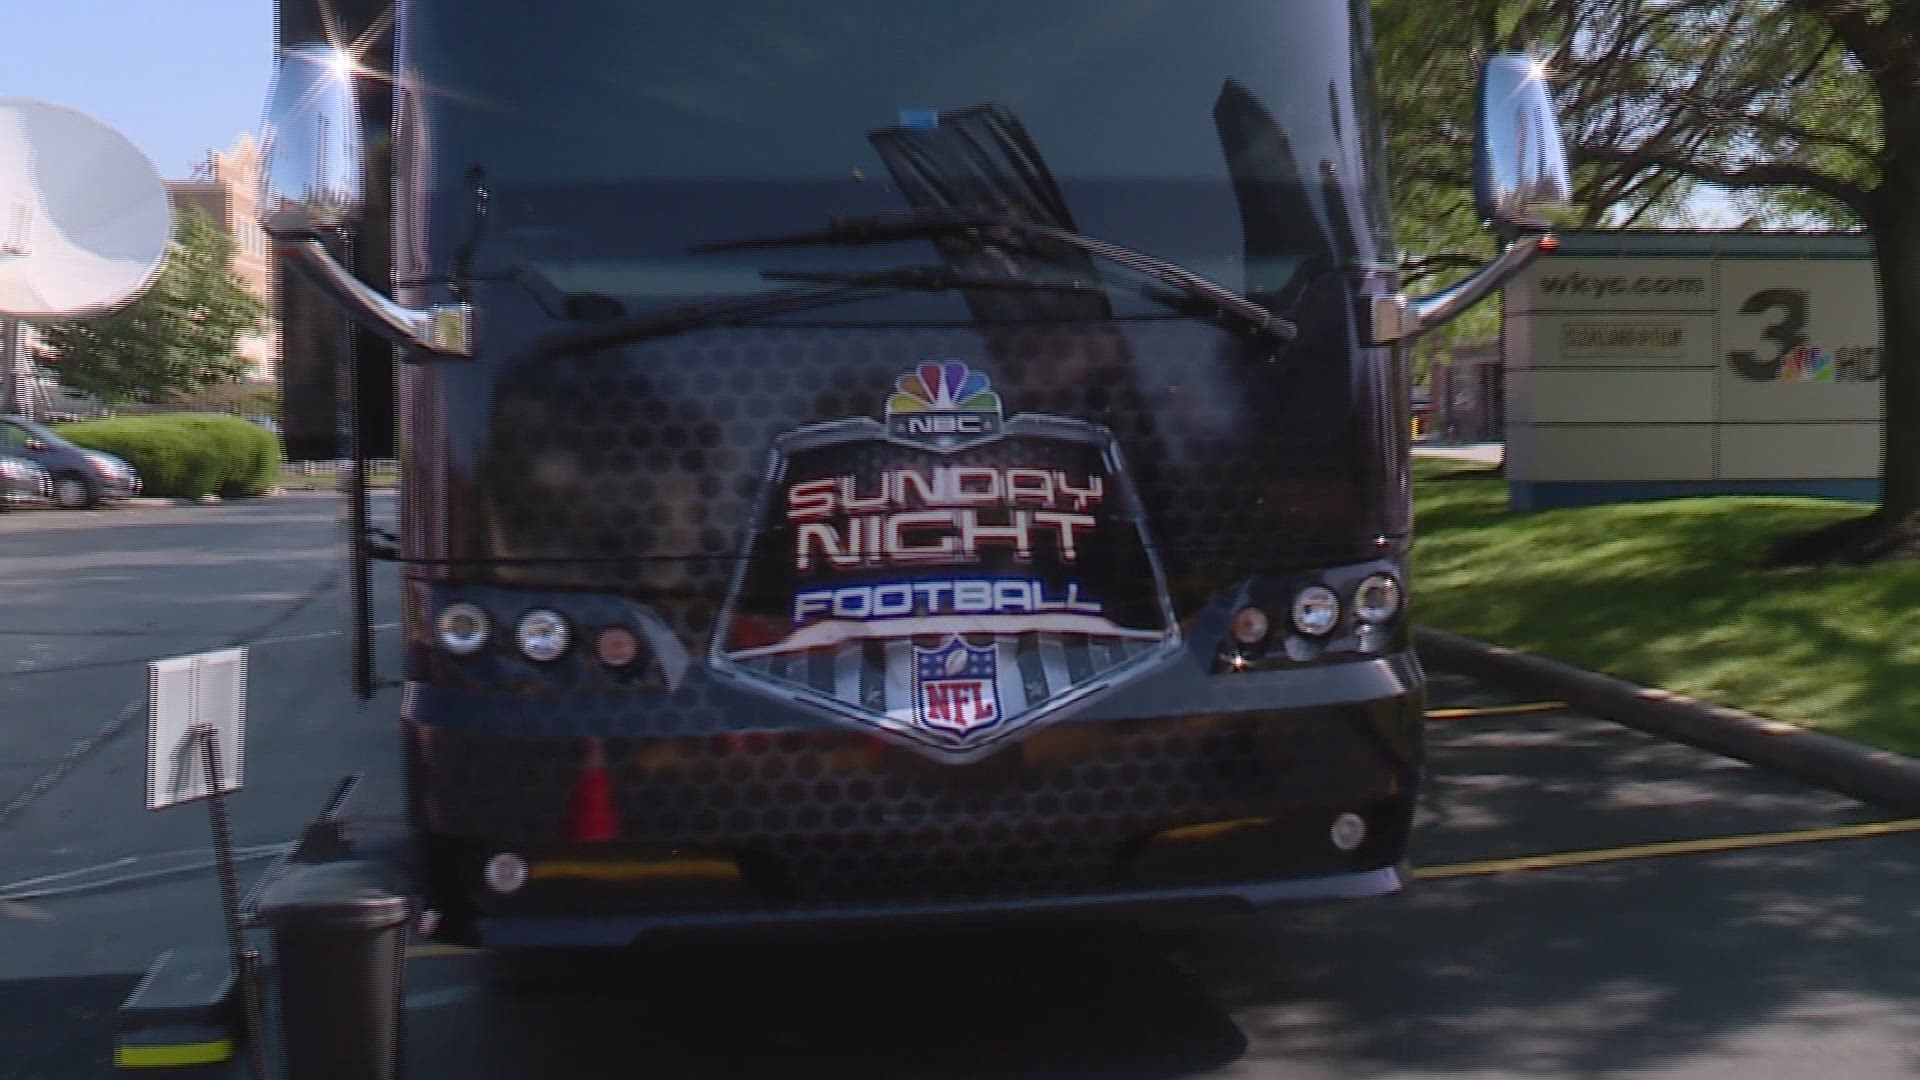 Channel 3’s Jay Crawford hopped on board the Sunday Night Football tour bus when it visited WKYC Studios. The Browns host the Rams in Cleveland on NBC.